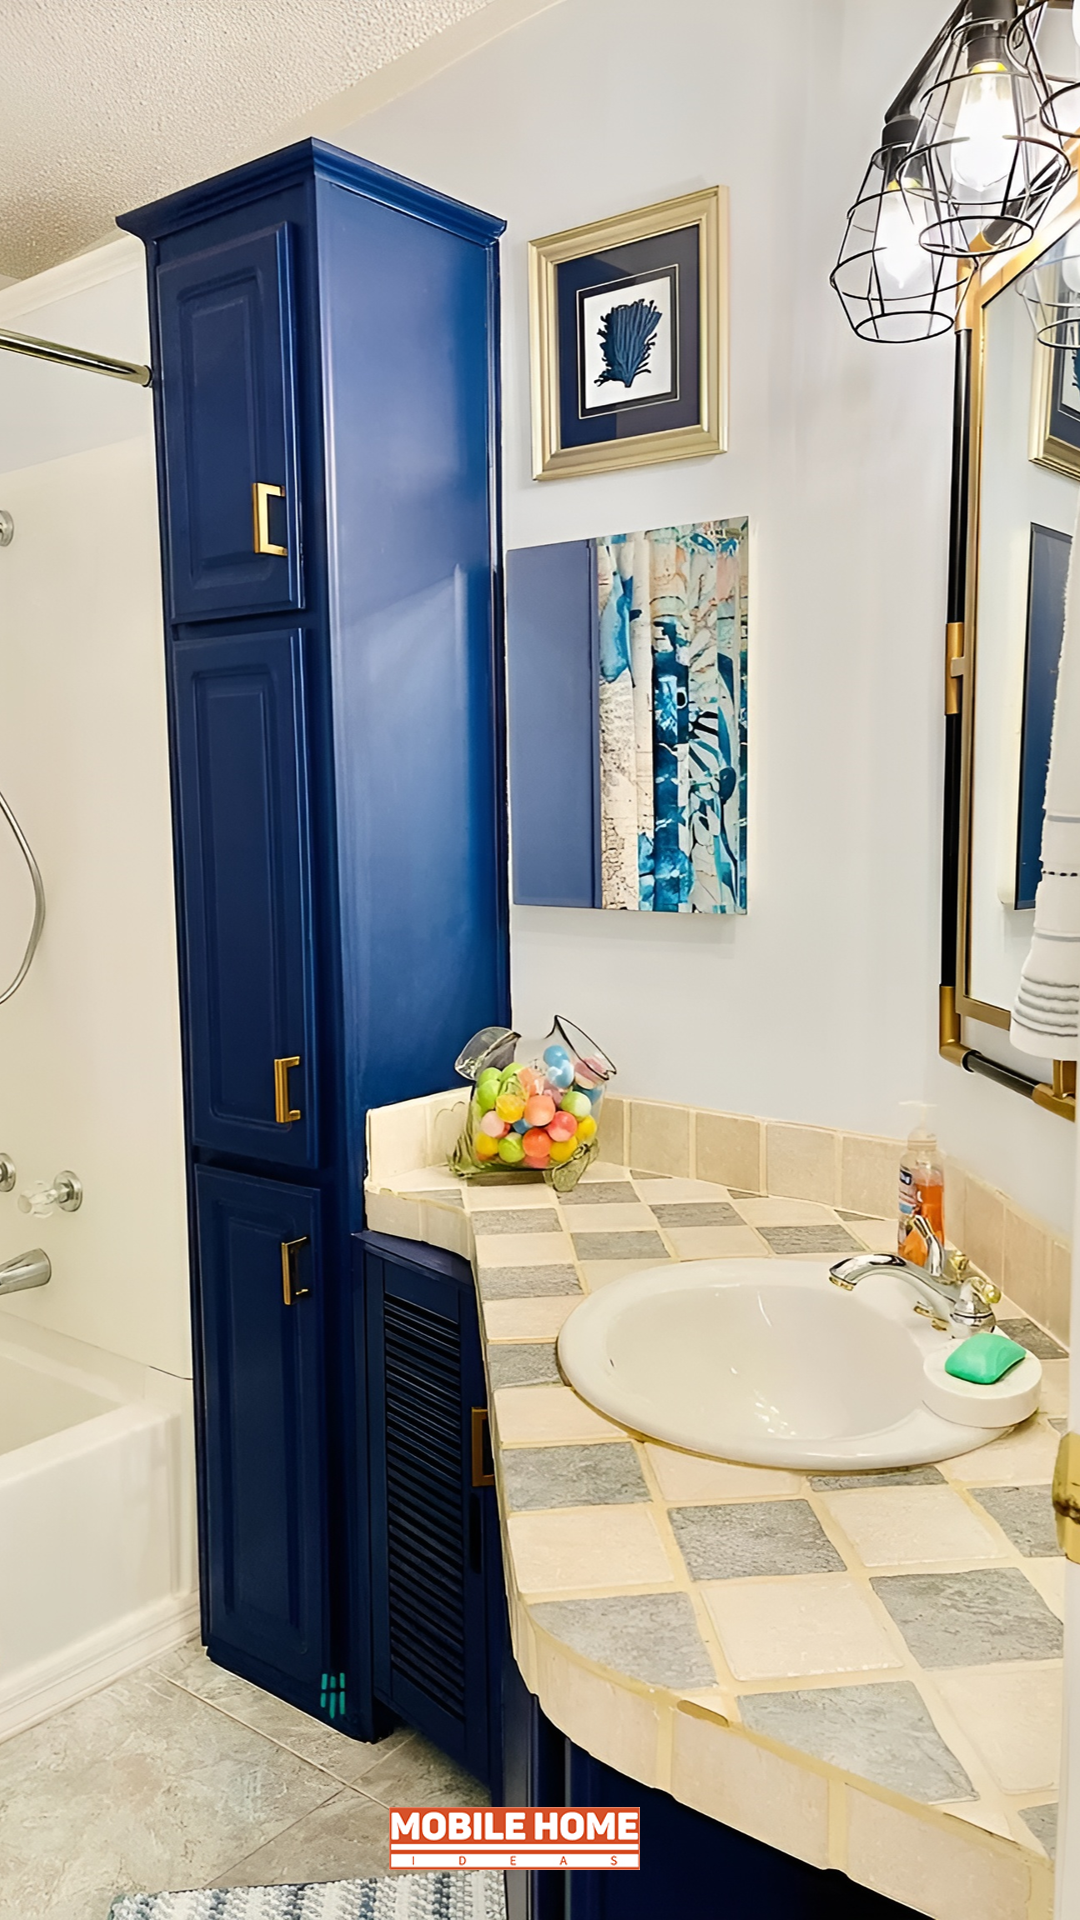 Mobile Home Bathroom Makeovers Install Peel-and-Stick Tiles